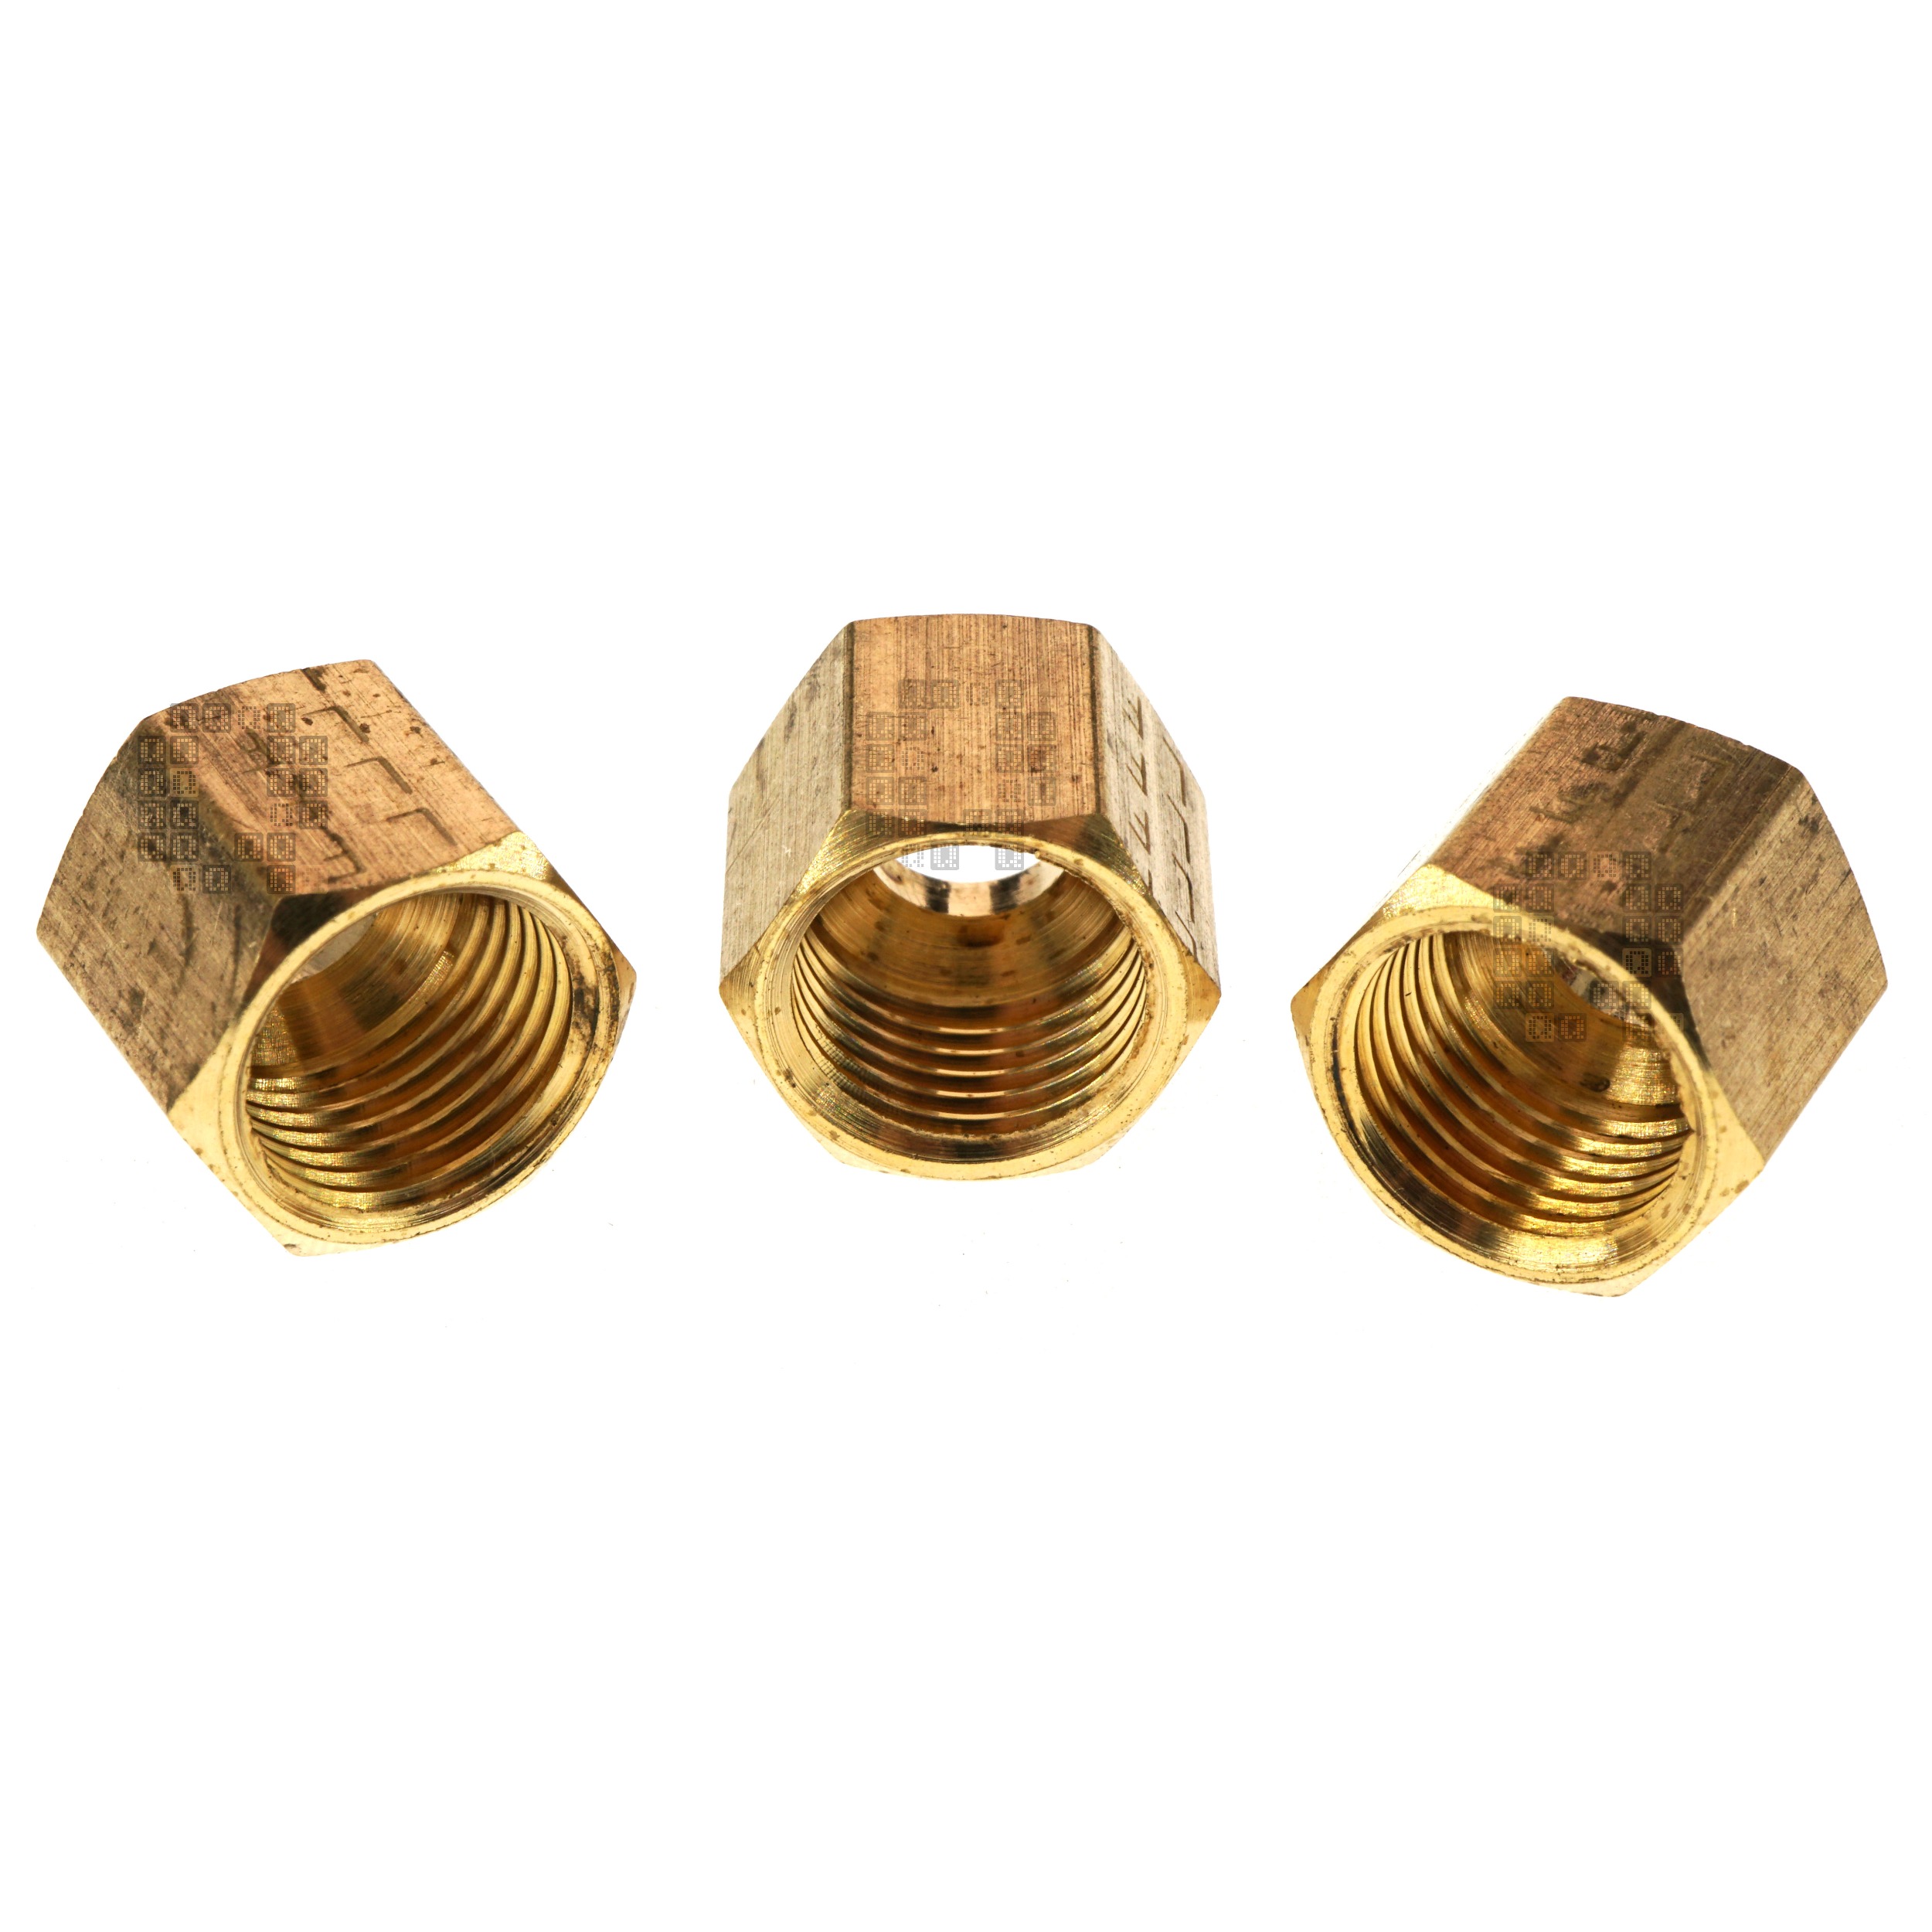 Anderson Metals 730061-04 Brass 1/4" Compression Nut, 3-Pack